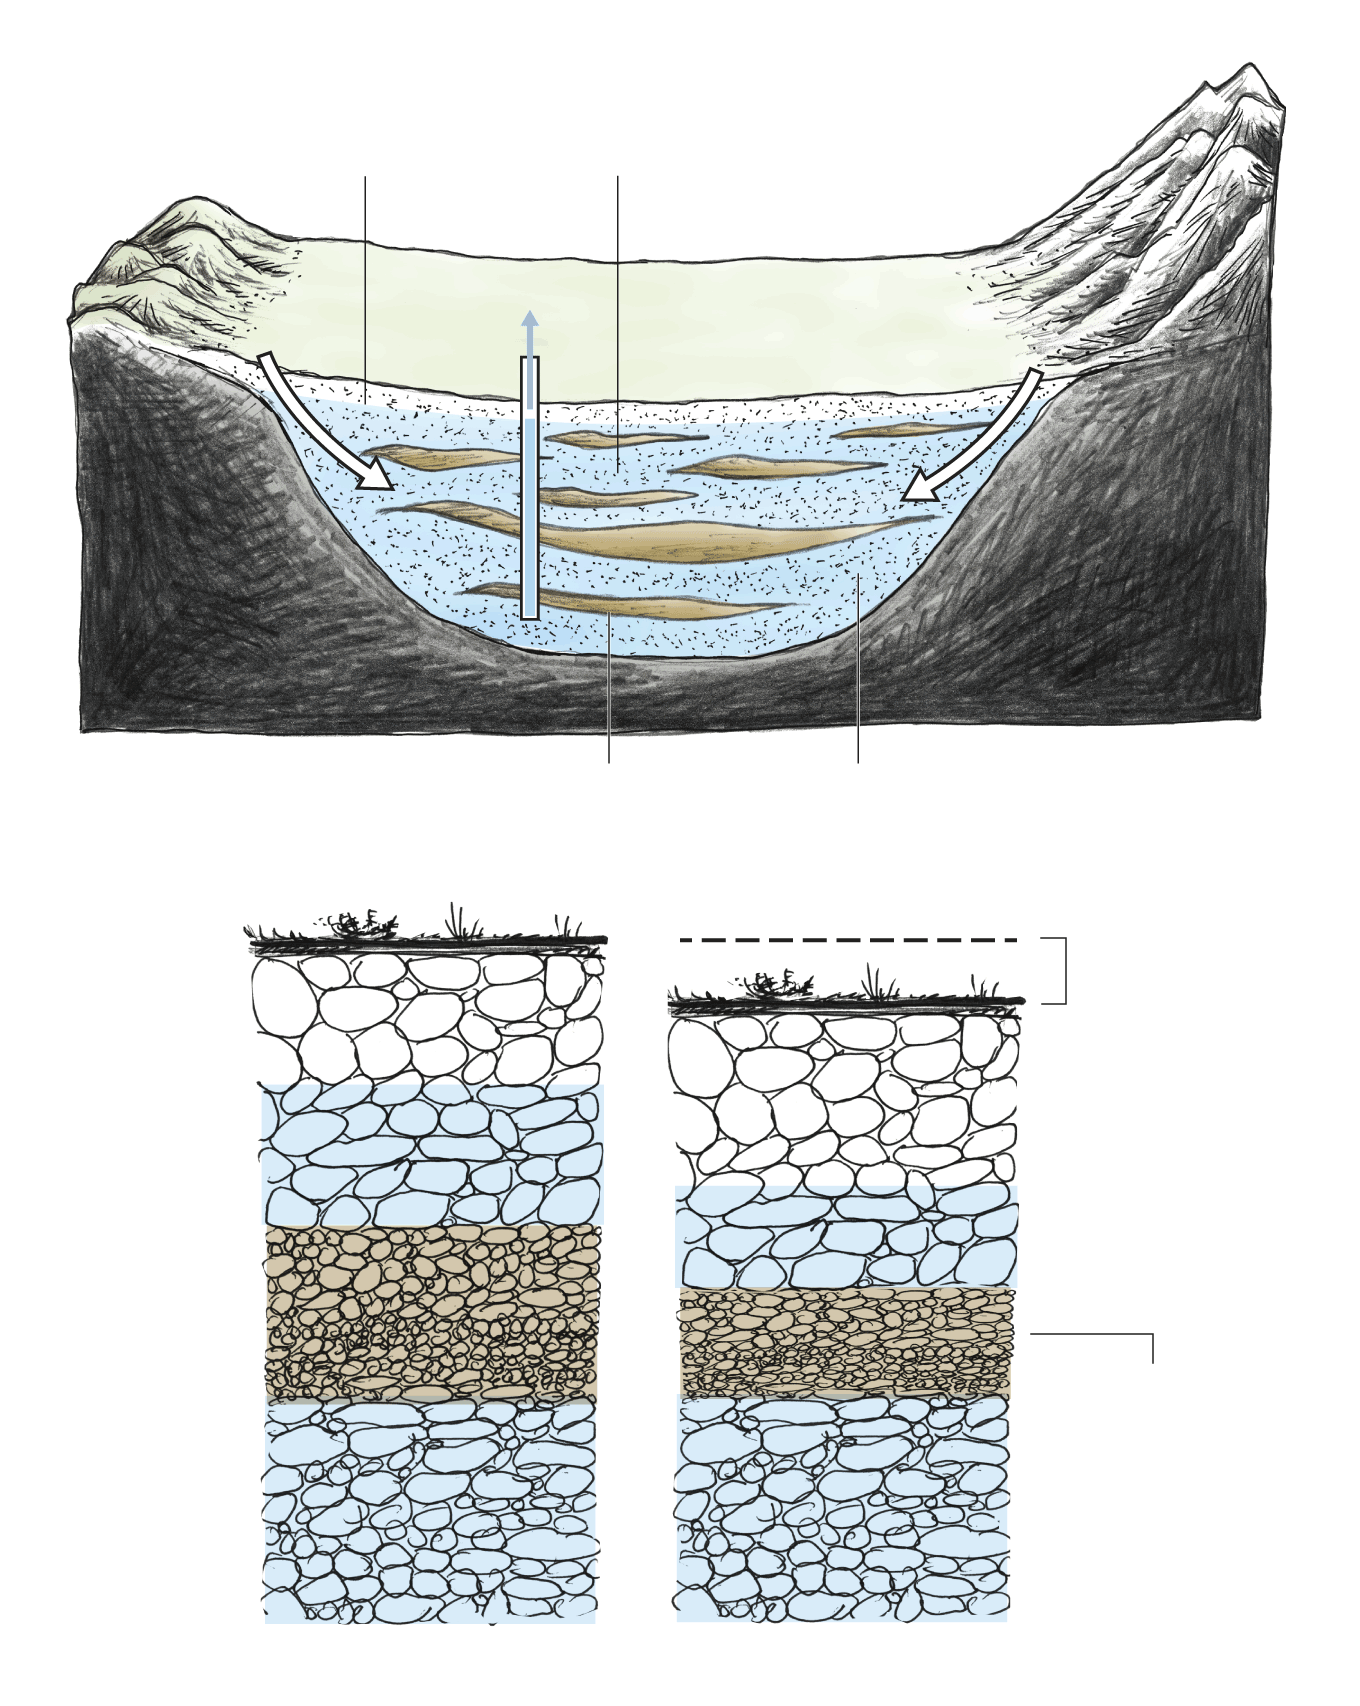 Diagram shows how water drawn from an aquifer compresses sand and gravel, causing the land above it to sink